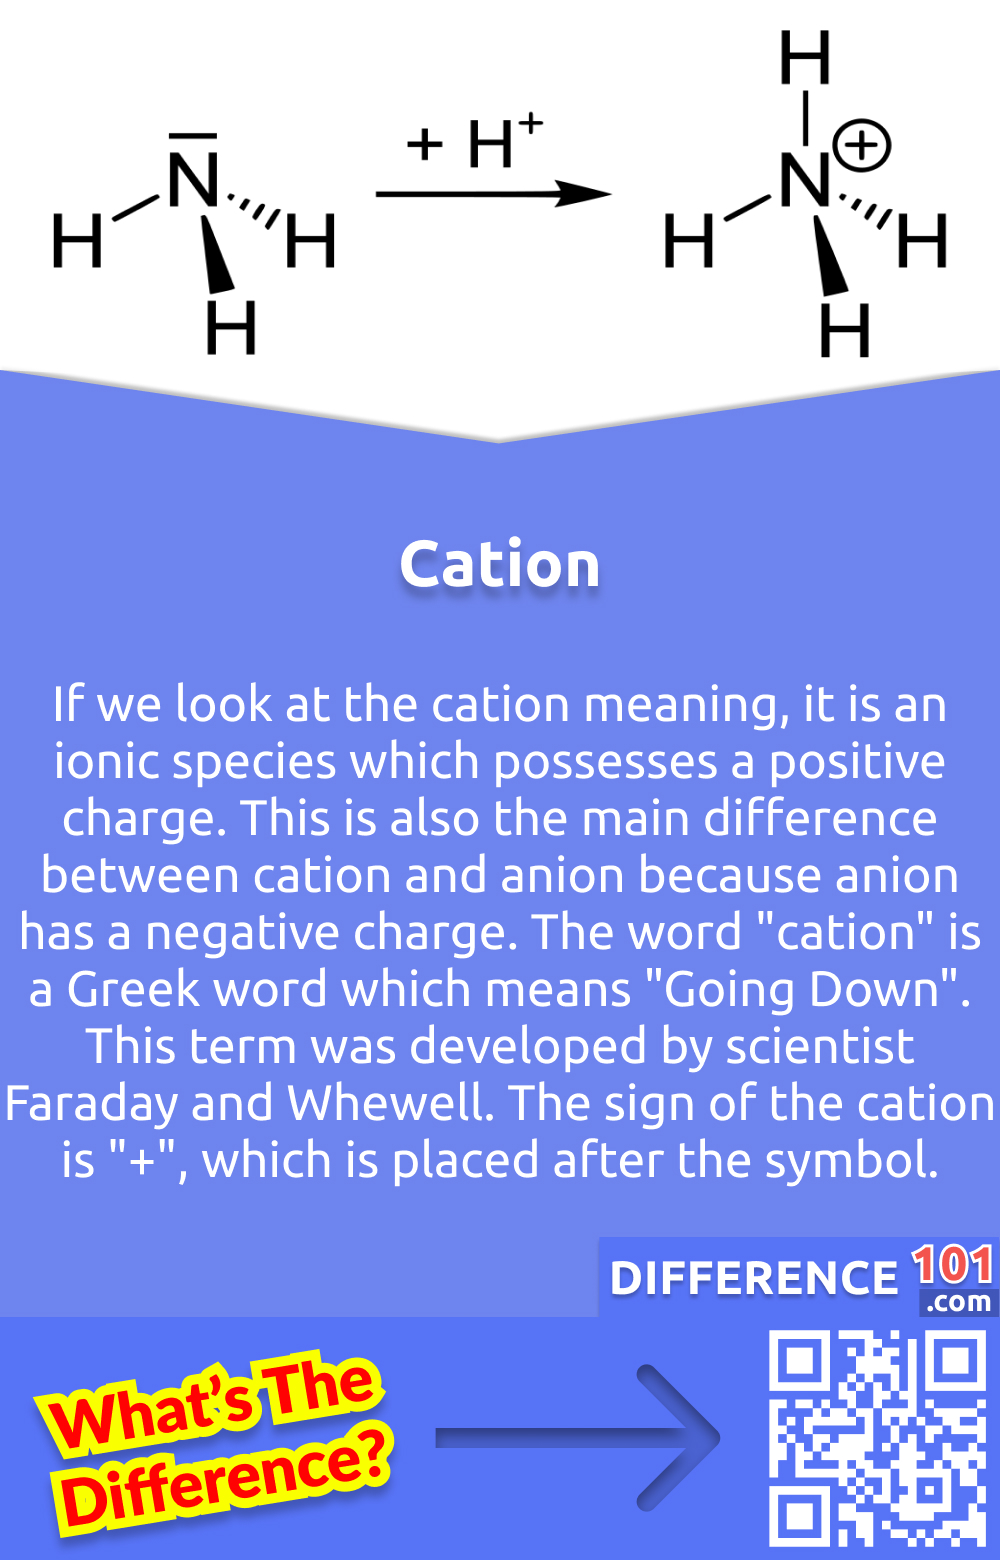 What Is a Cation? If we look at the cation meaning, it is an ionic species which possesses a positive charge. This is also the main difference between cation and anion because anion has a negative charge. The word "cation" is a Greek word which means "Going Down". This term was developed by scientist Faraday and Whewell. The sign of the cation is "+", which is placed after the symbol. For example, a potassium atom loses one electron and thus has a 1+ charge. This positive charge is due to the loss of electrons by an atom, as it gains the positive charge when there is more proton in the nucleus than electrons. There are many cations that we use in our daily lives as well. And some of them are very essential for our health, like sodium, iron, magnesium potassium. Which plays an important role in maintaining good health.